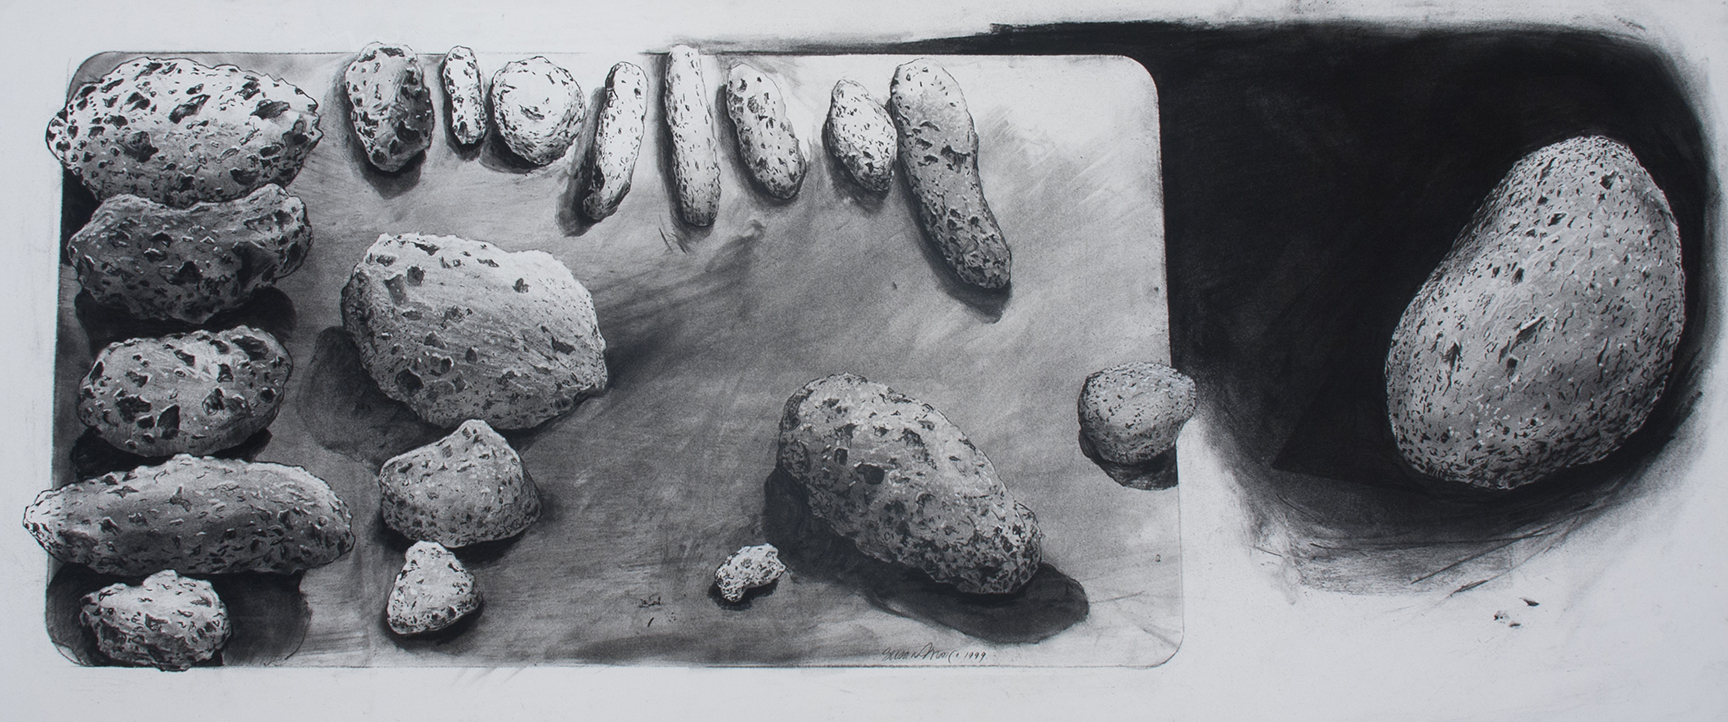   Untitled (Volcanic Rocks)   Charcoal, on paper  20" x 50" 